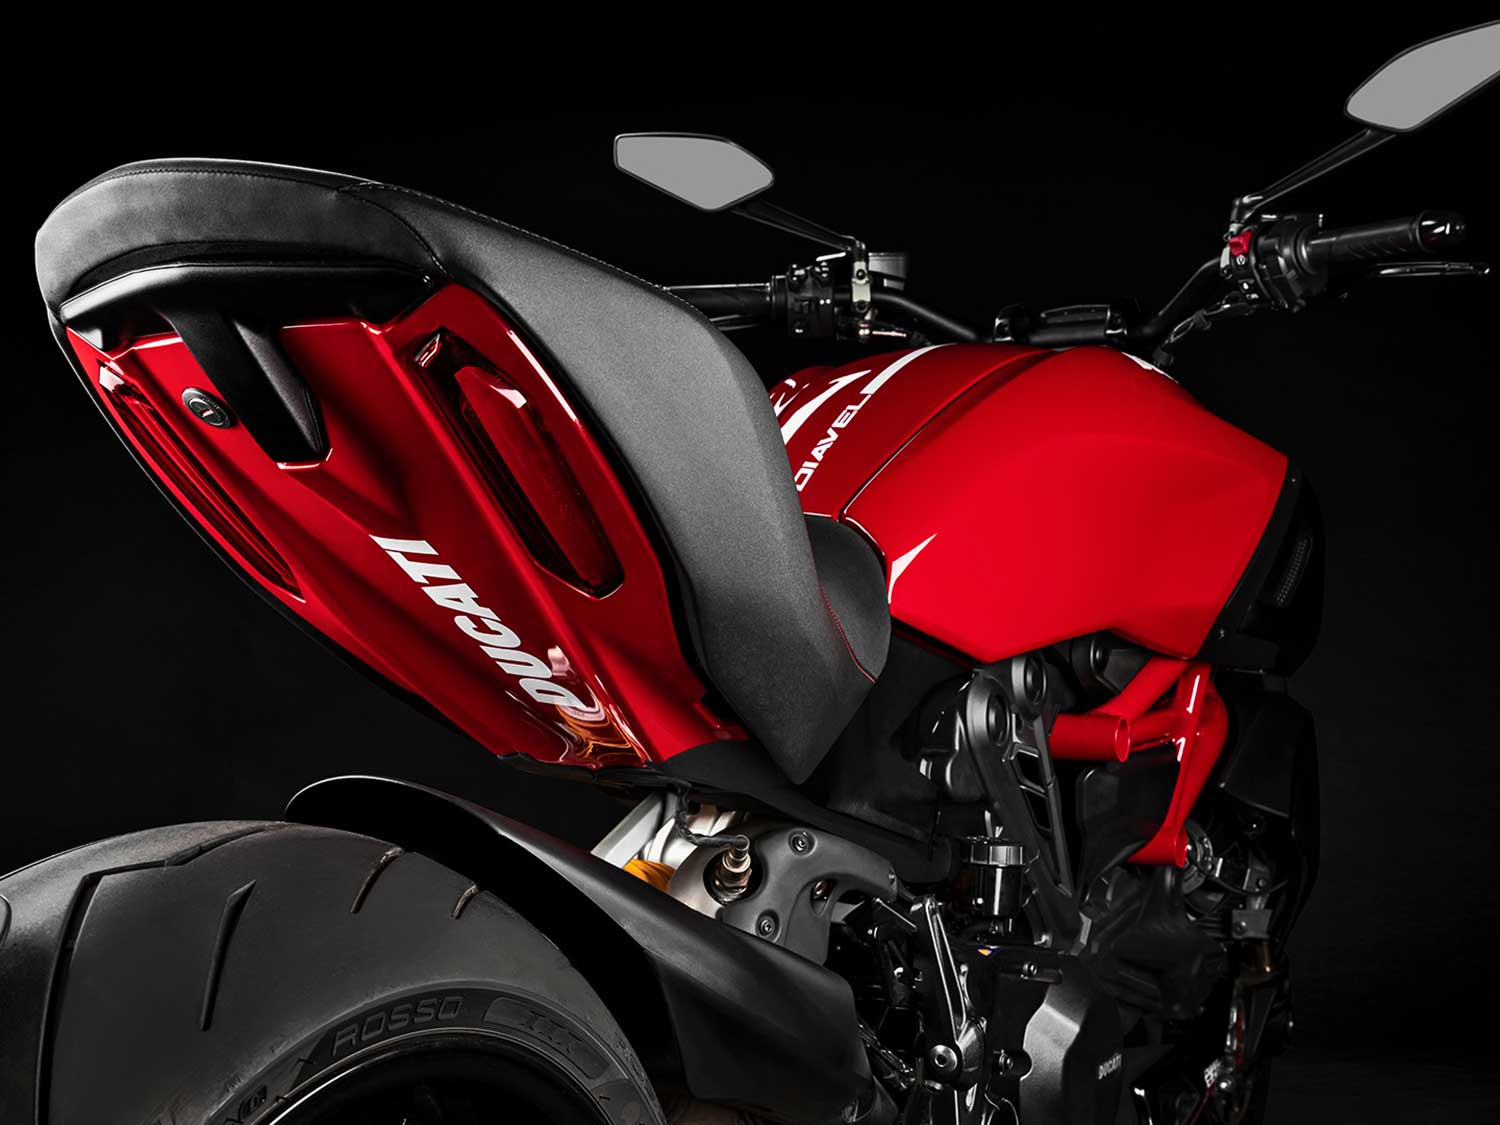 Ducati flair on the 1260 S comes standard, with the new red tone contrasted against white details.